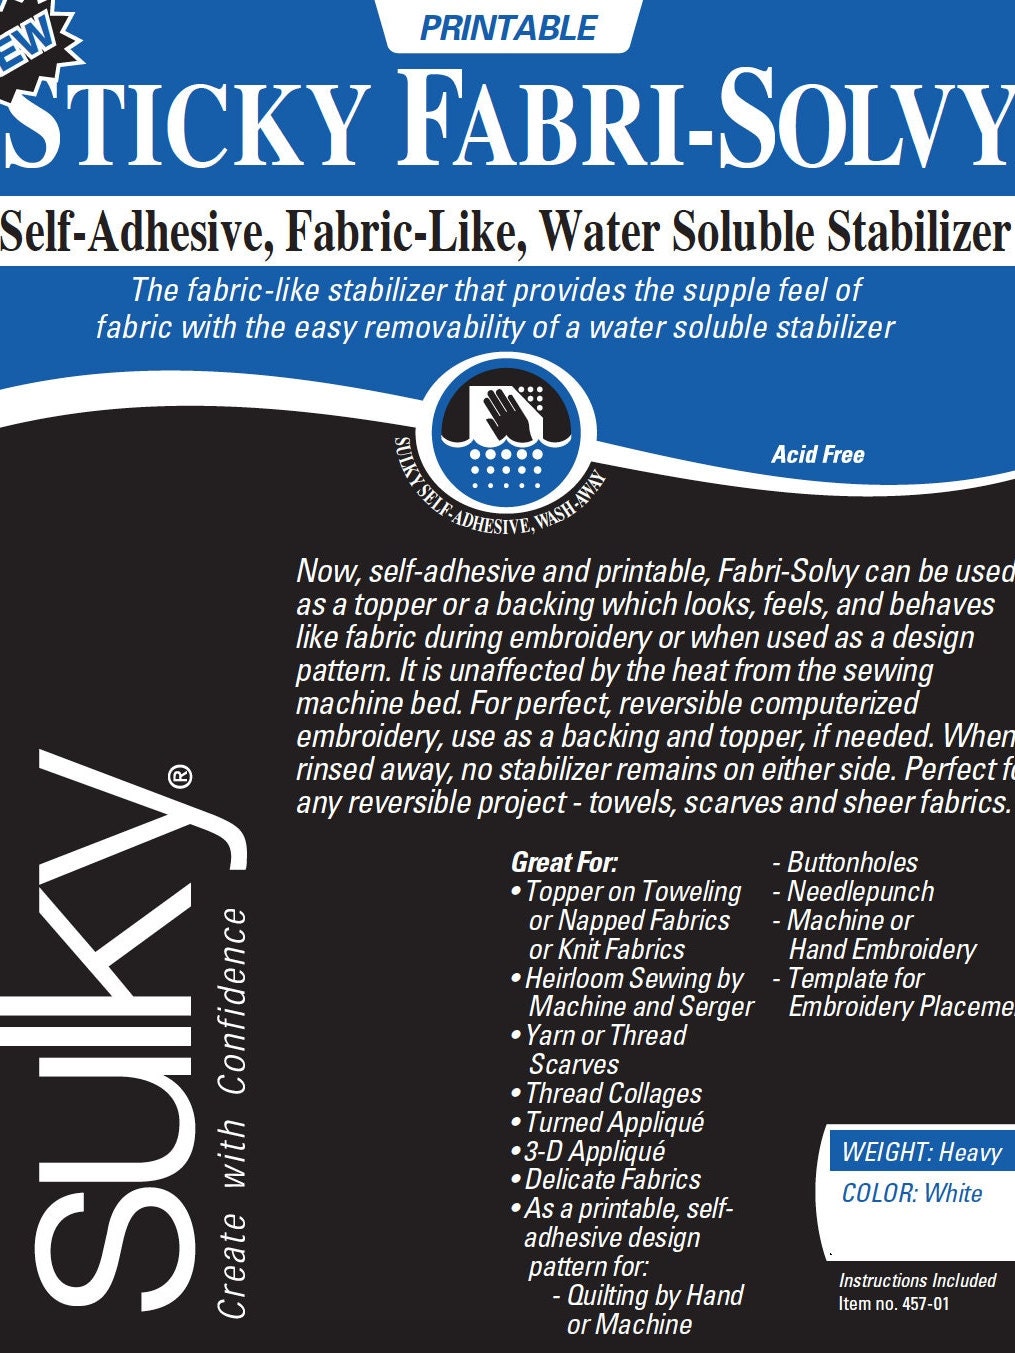 Sulky Sticky Fabri-solvy Water Soluble Stabilizer, Embroidery